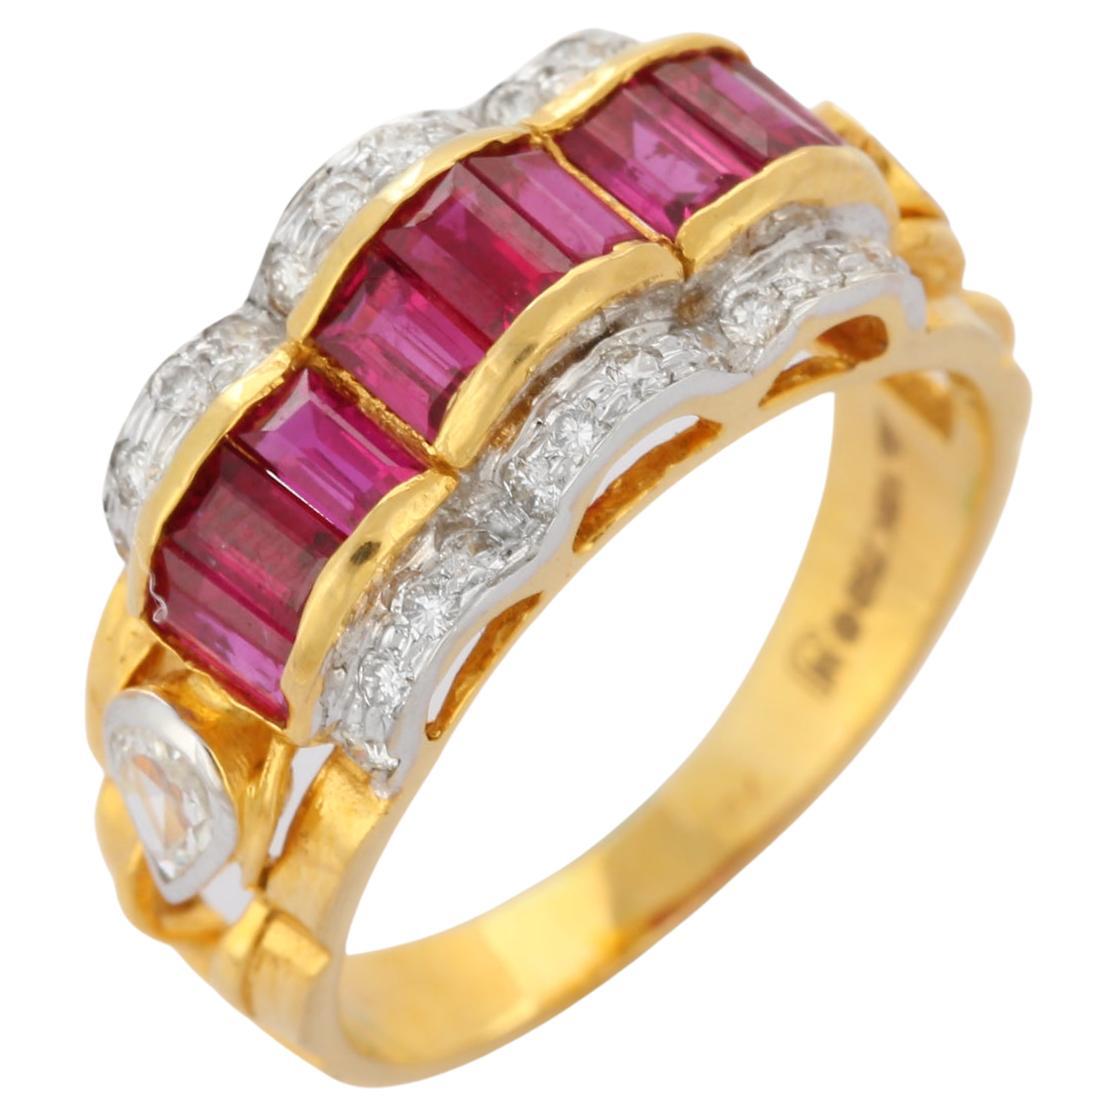 Contemporary 2.7 ct Ruby and Diamond Wedding Ring in 18K Yellow Gold